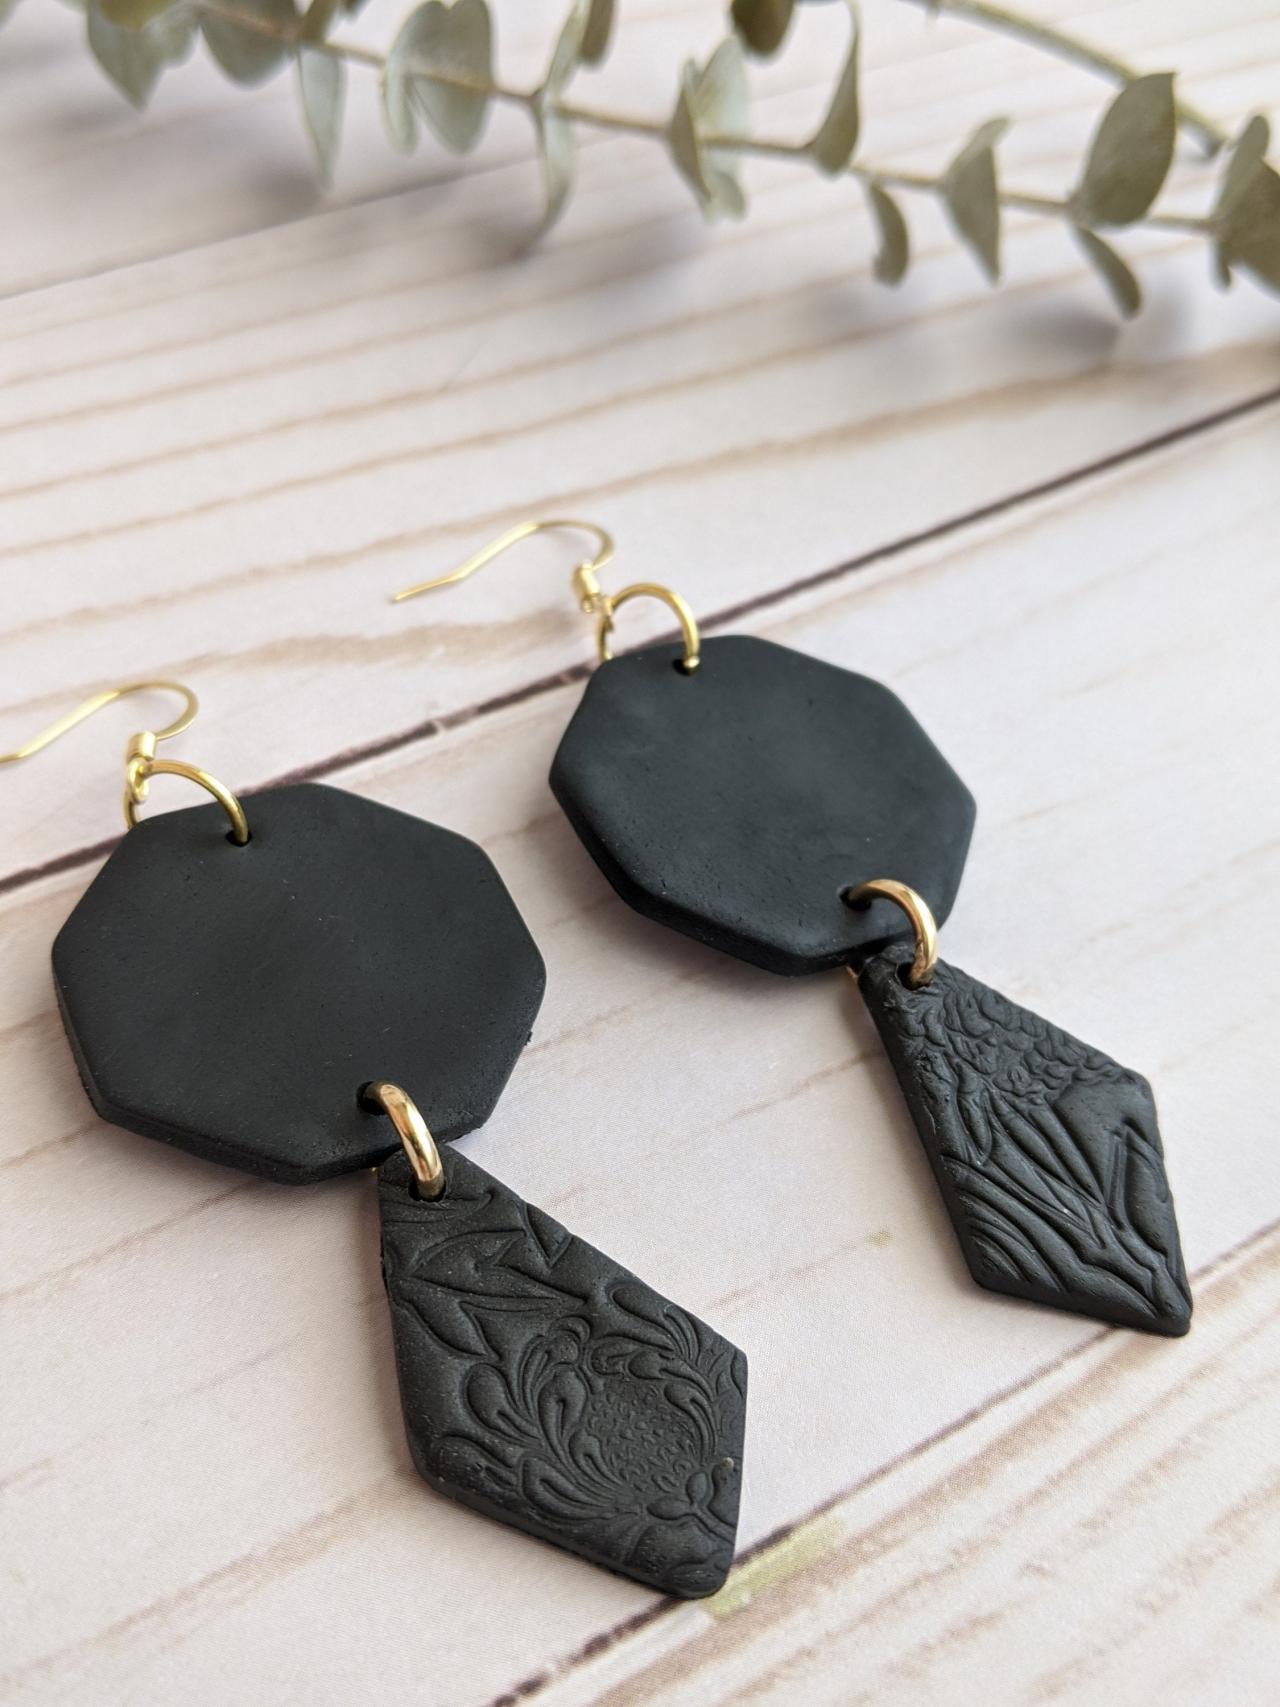 Black Floral Polymer Clay Earrings, Dangle Earrings, Clay Statement Earrings, Handmade Clay Earrings, Custom Clay Earrings, Clay Earrings